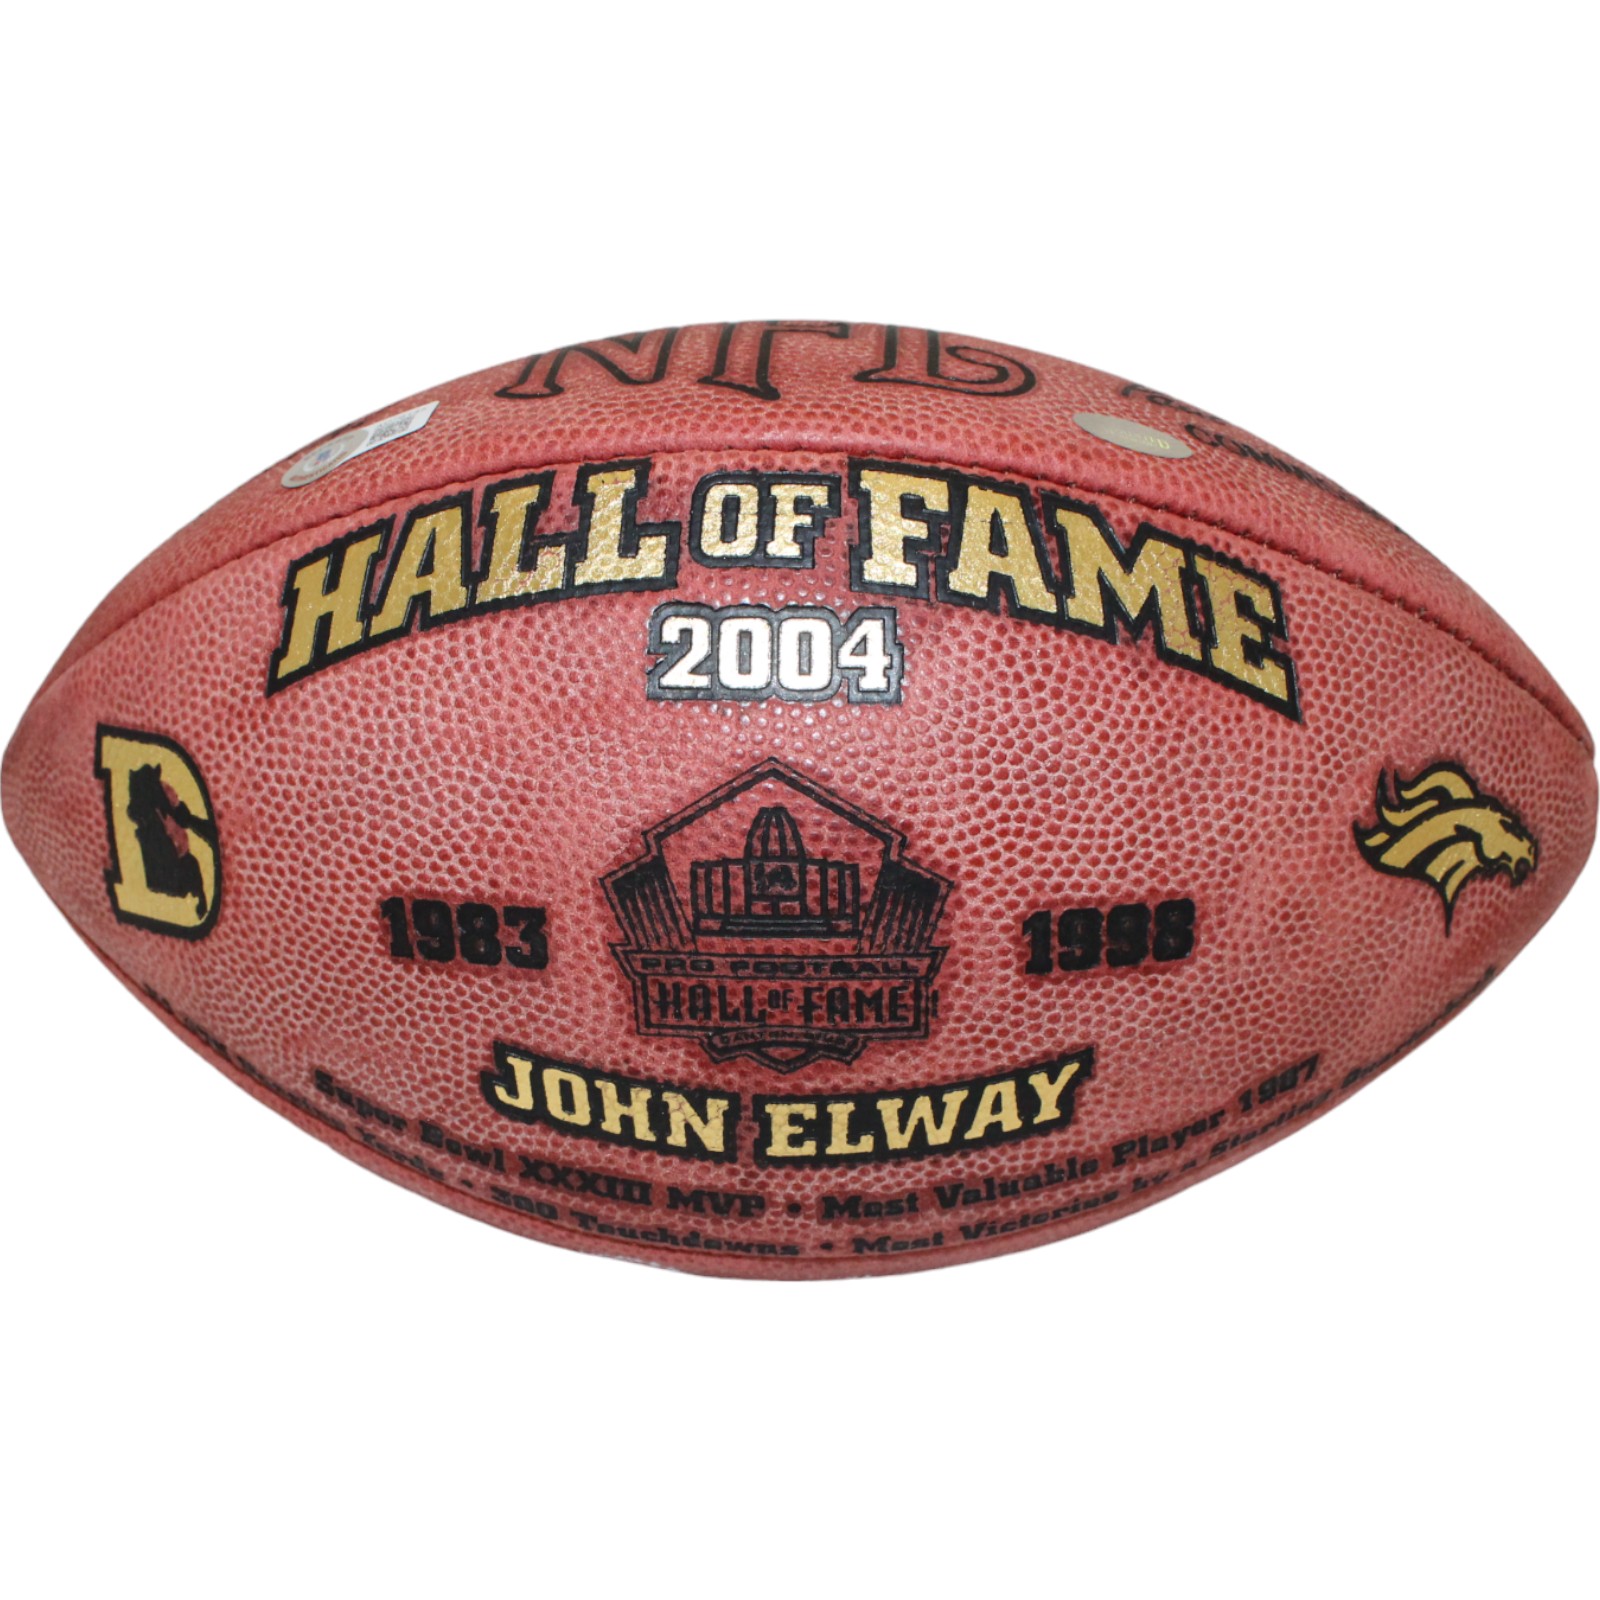 John Elway Signed Hall of Fame 2004 Official Football 527/2004 Beckett 44305